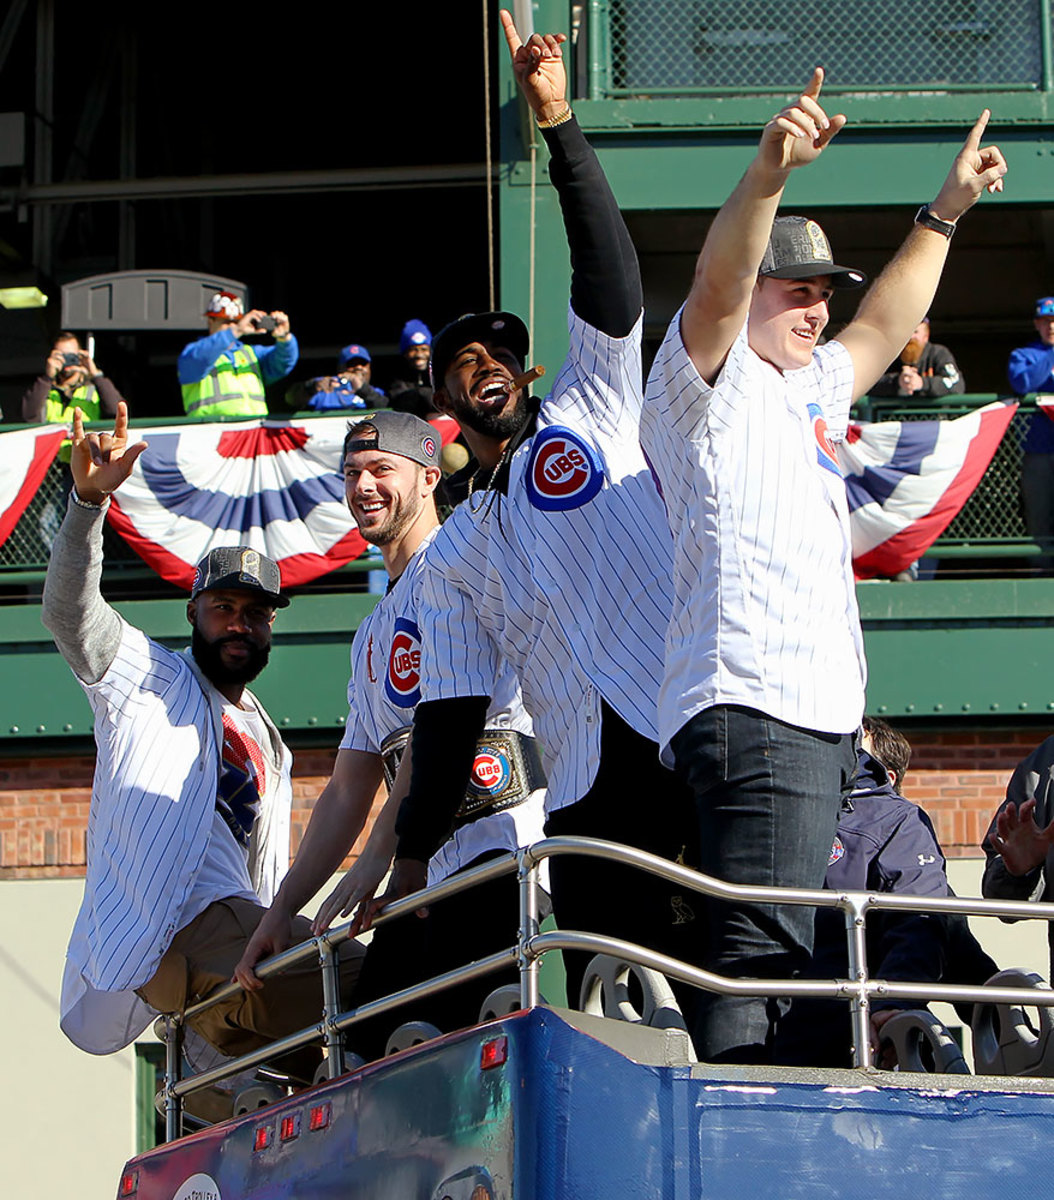 Chicago-Cubs-Victory-Parade-Jason-Heyward-Kris-Bryant-Dexter-Fowler-Anthony-Rizzo-621089716.jpg